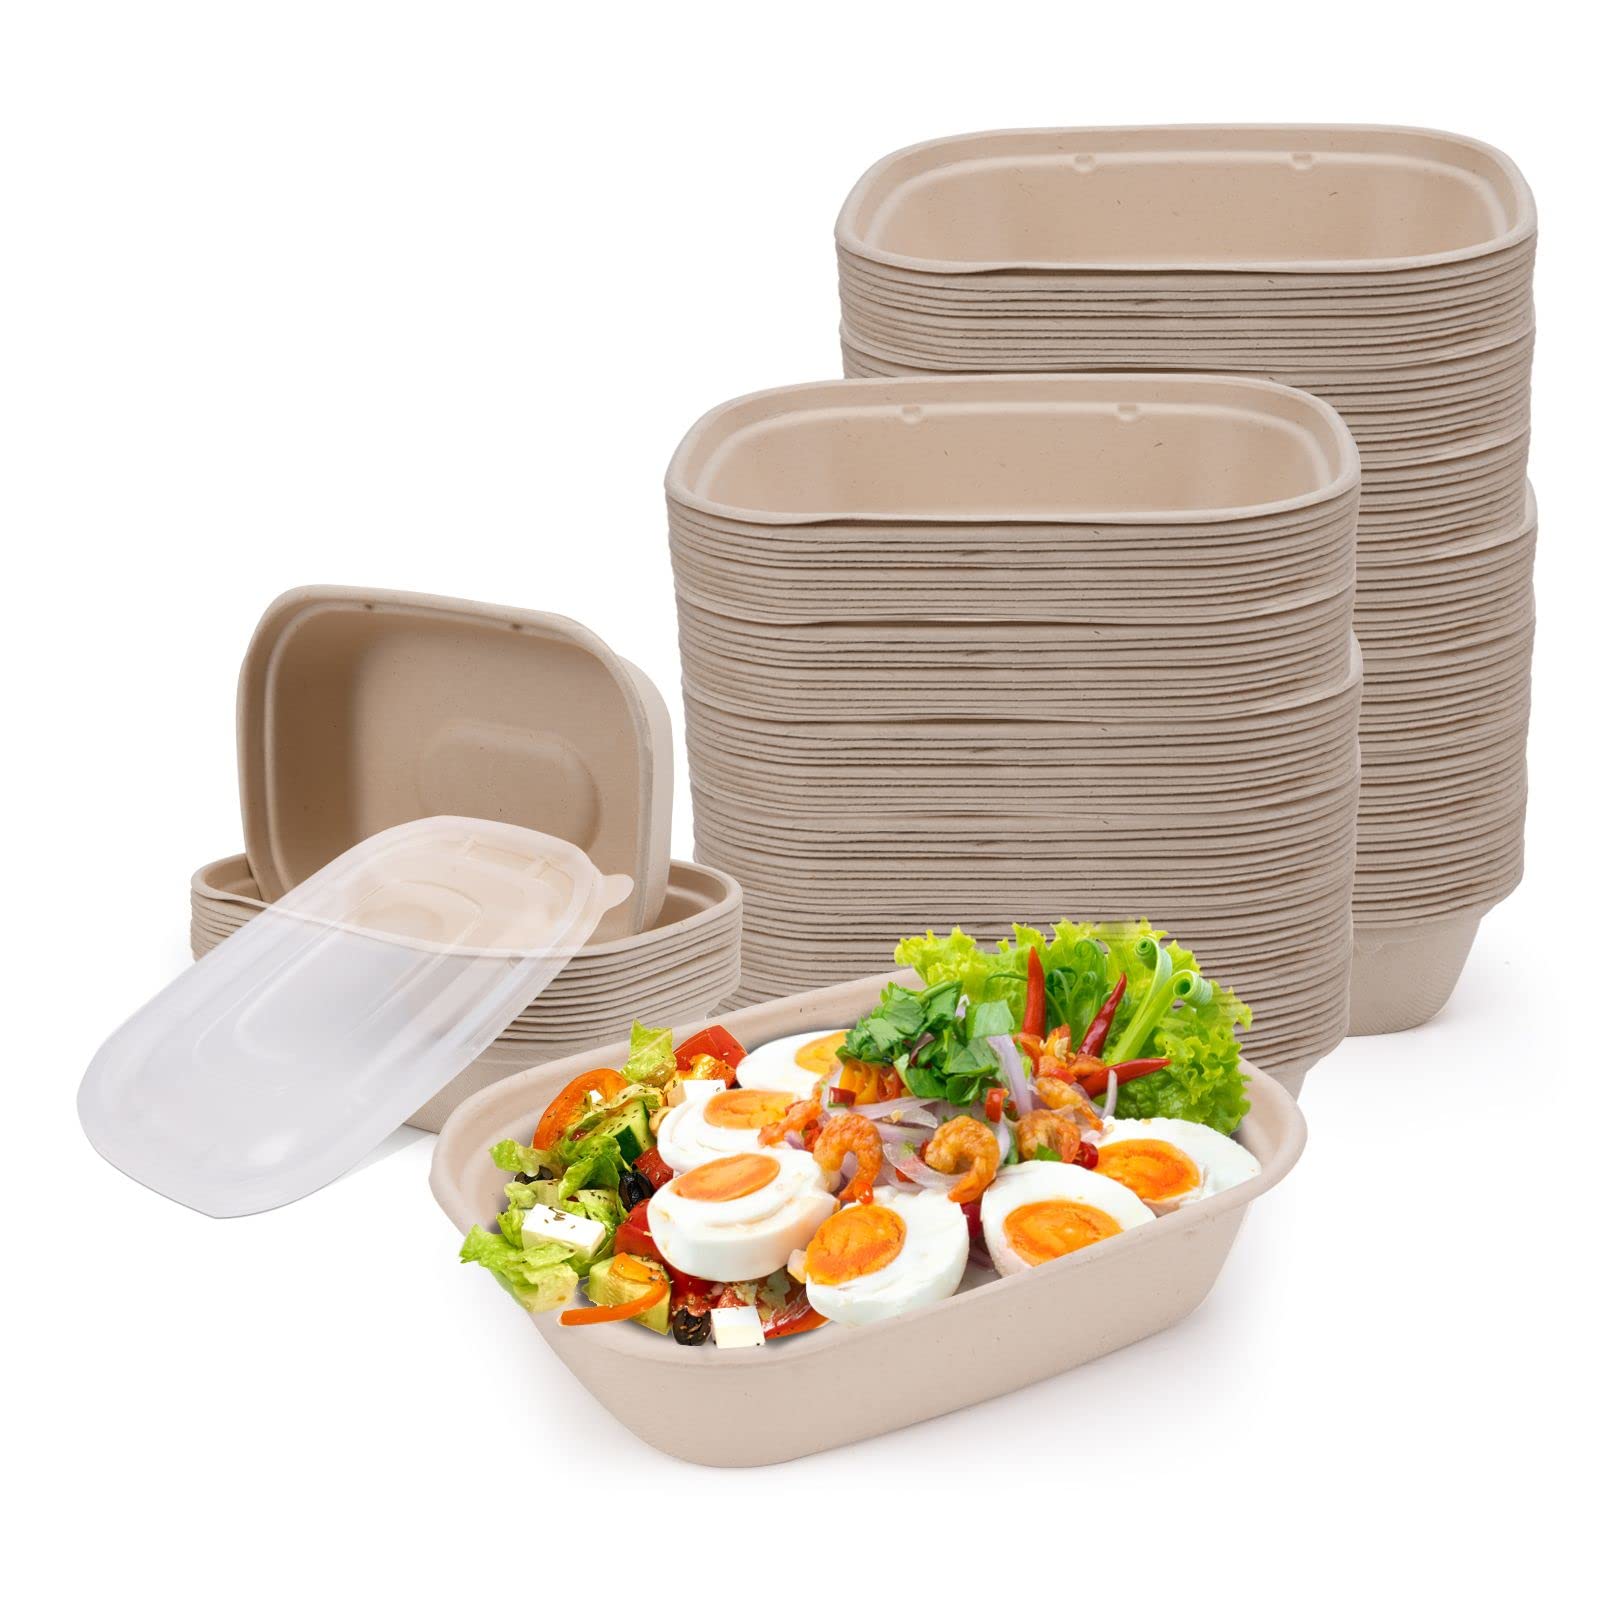 Kaderron 35 oz 50 Pack Compostable Large Paper Bowls with Lids, 100%  Biodegradable Disposable Bowls Bulk Leakproof and Microwave Safe for  Hot/Cold Use